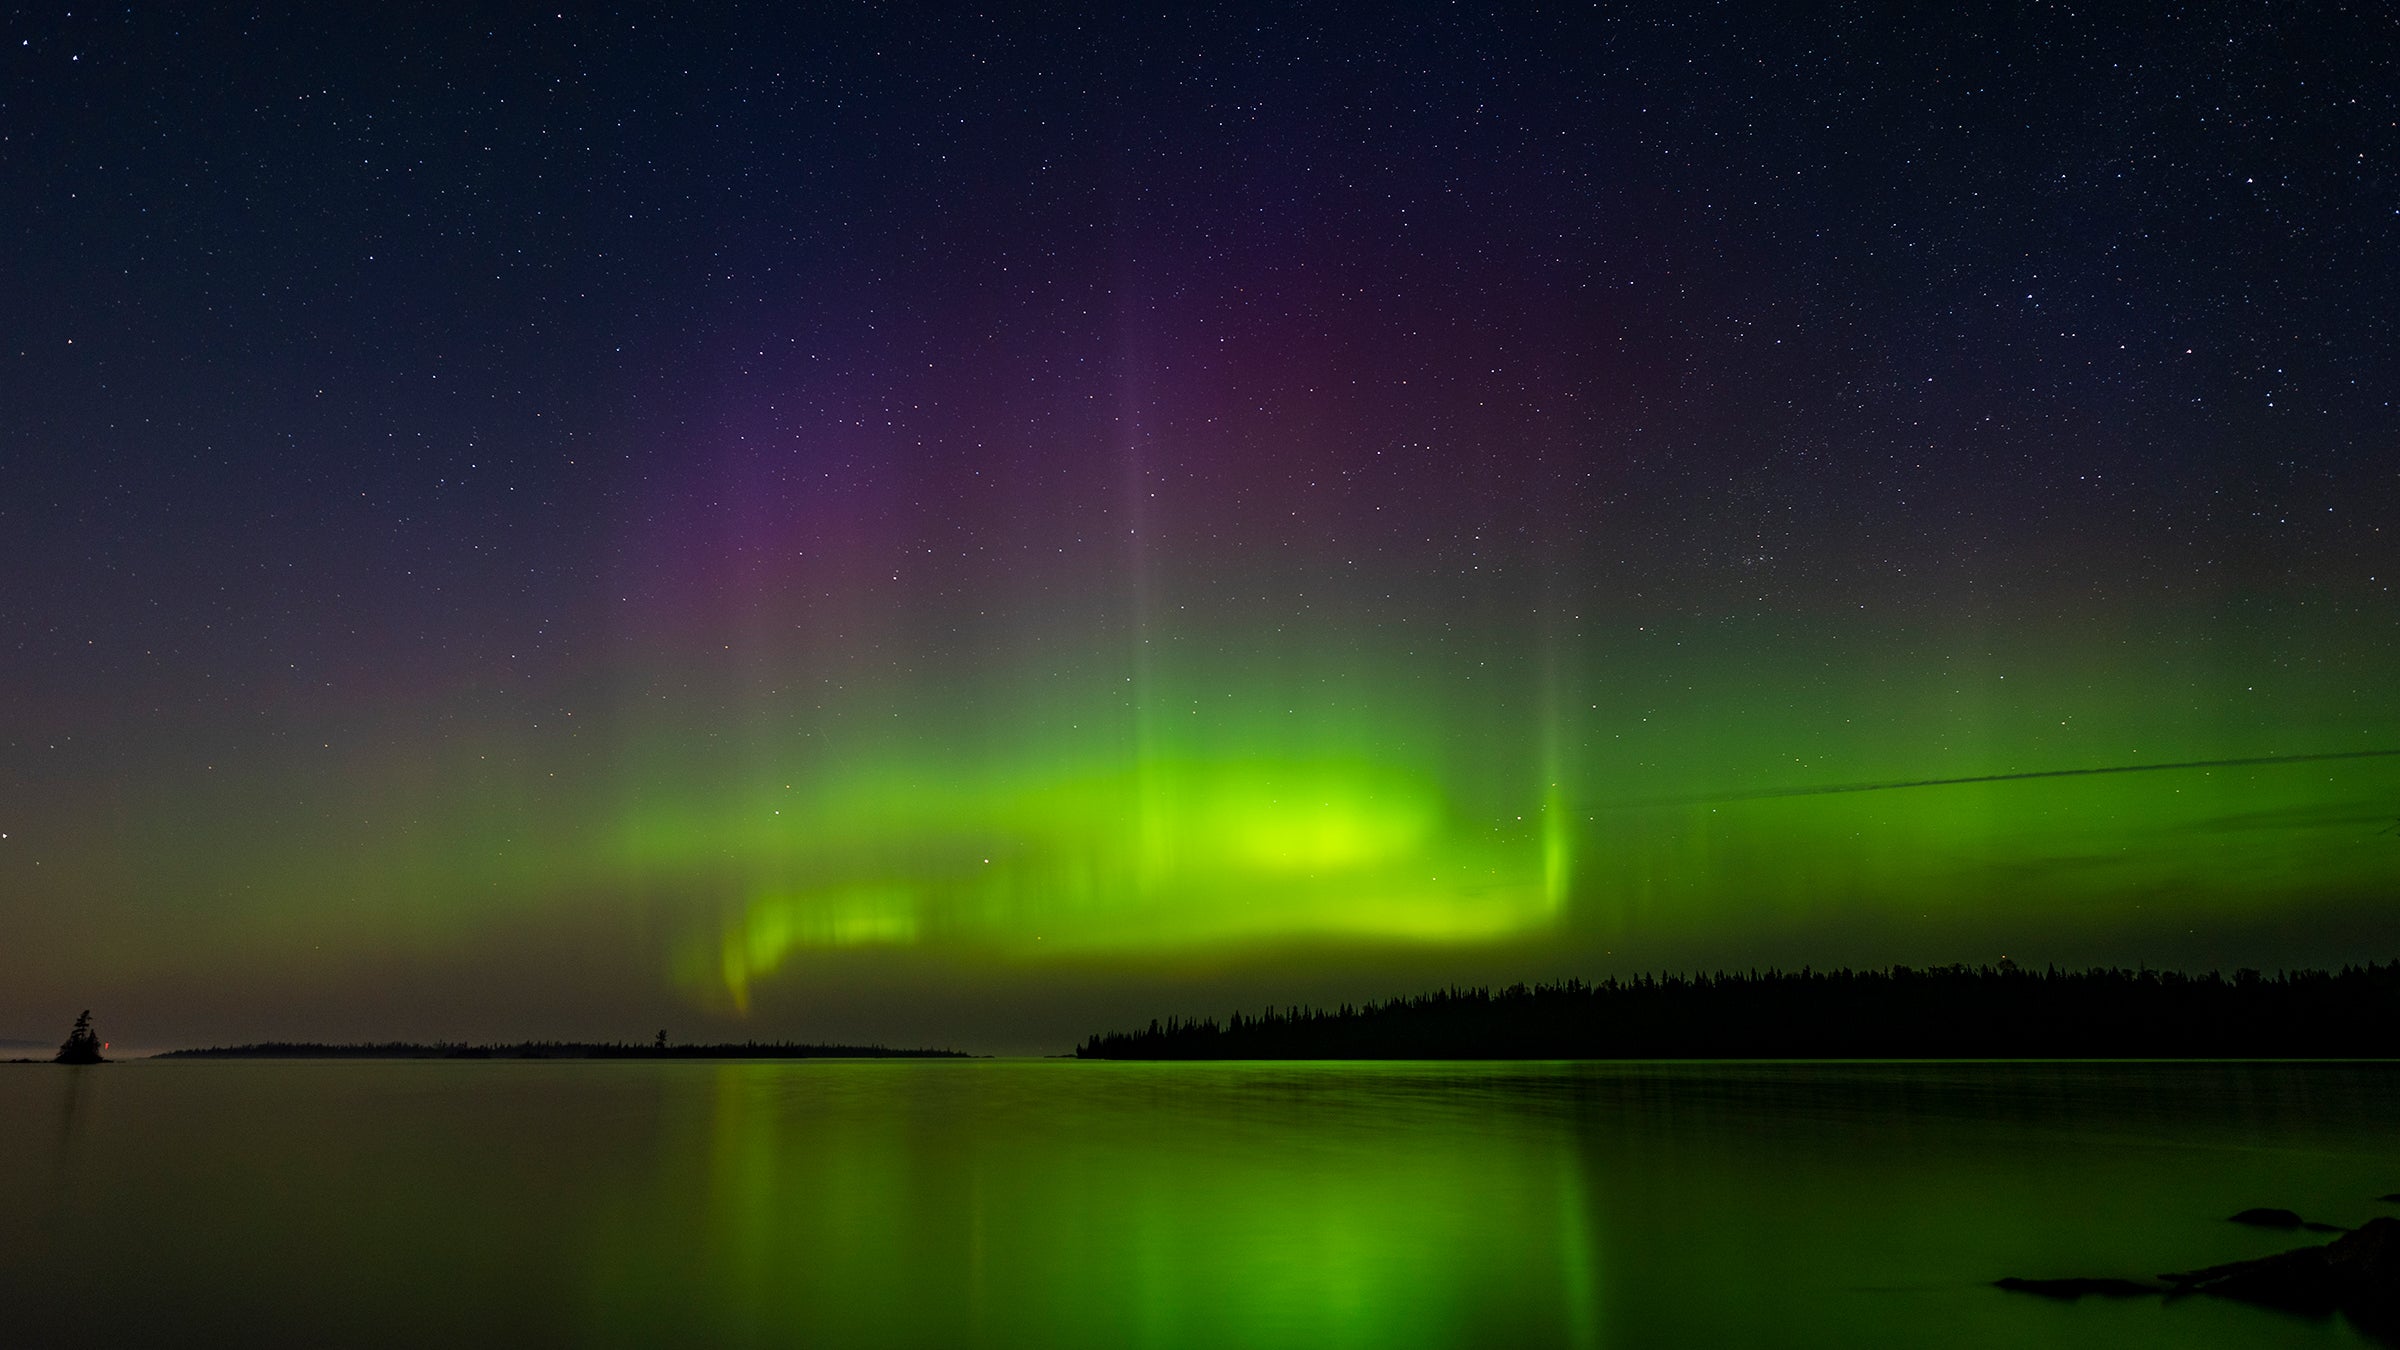 Northern Lights most prevalent in coming weeks - Aurora Borealis